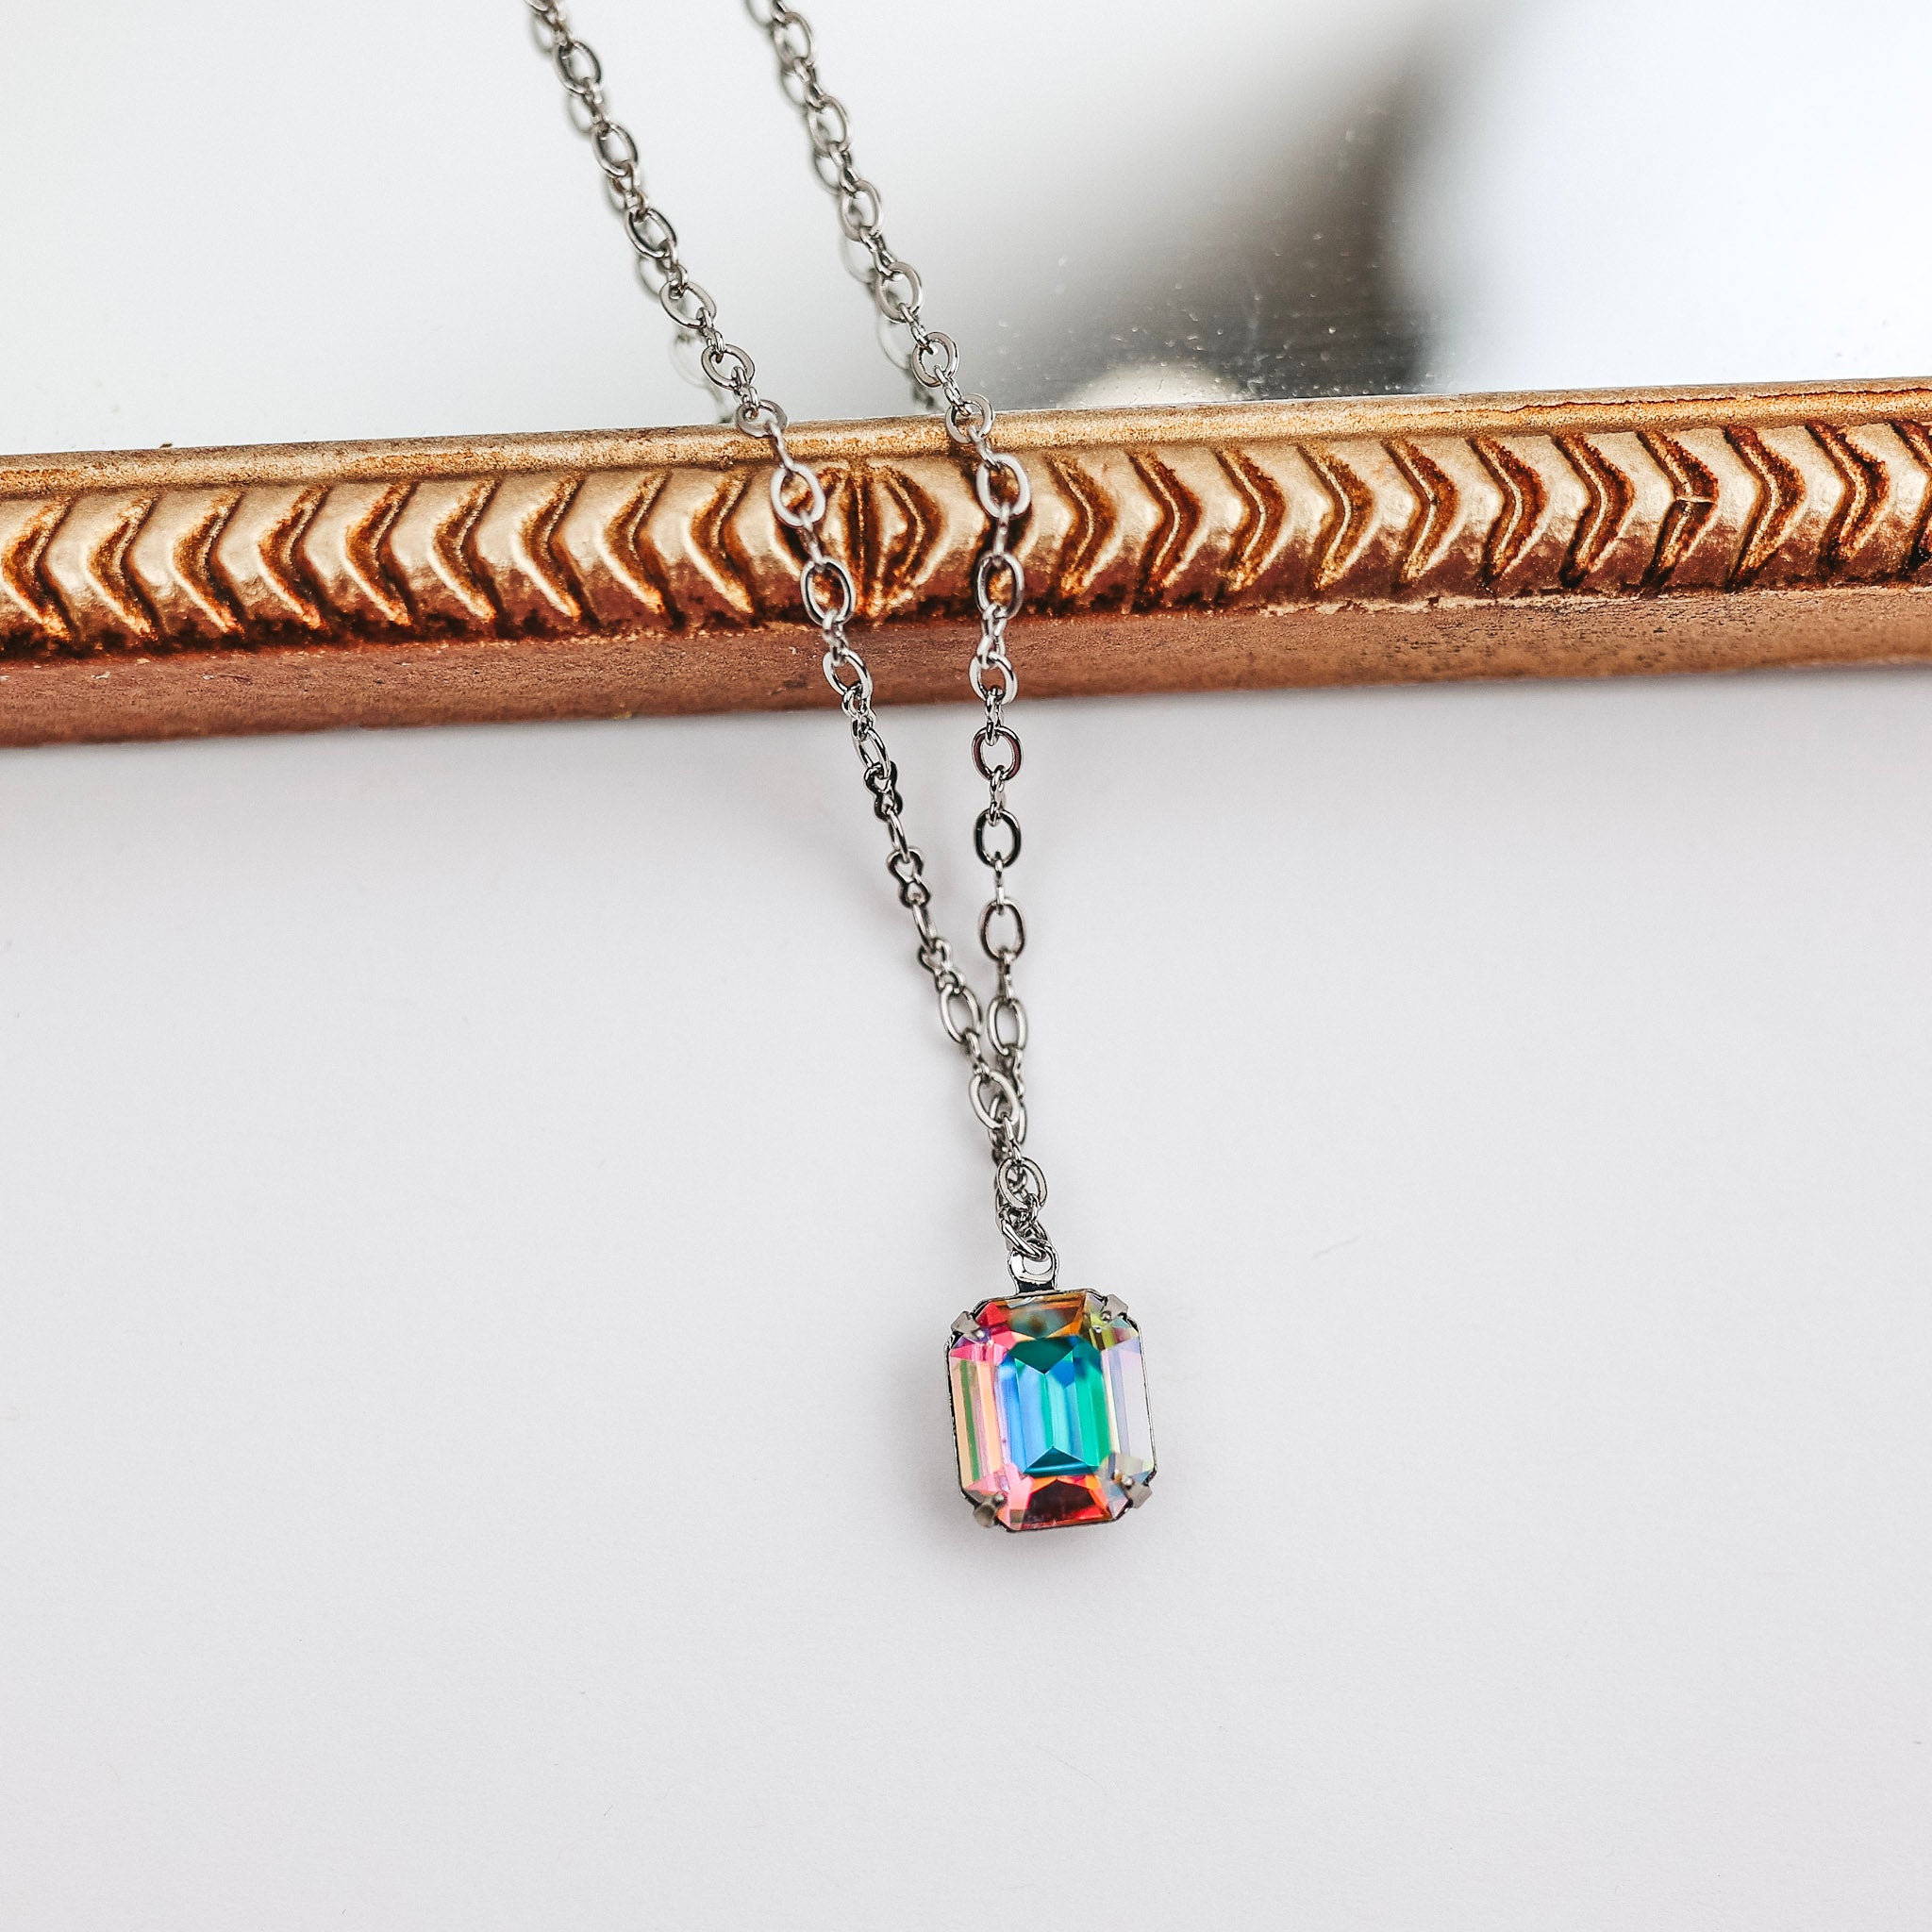 A silver-tone necklace with a single emerald cut crystal pendant that is colorful.